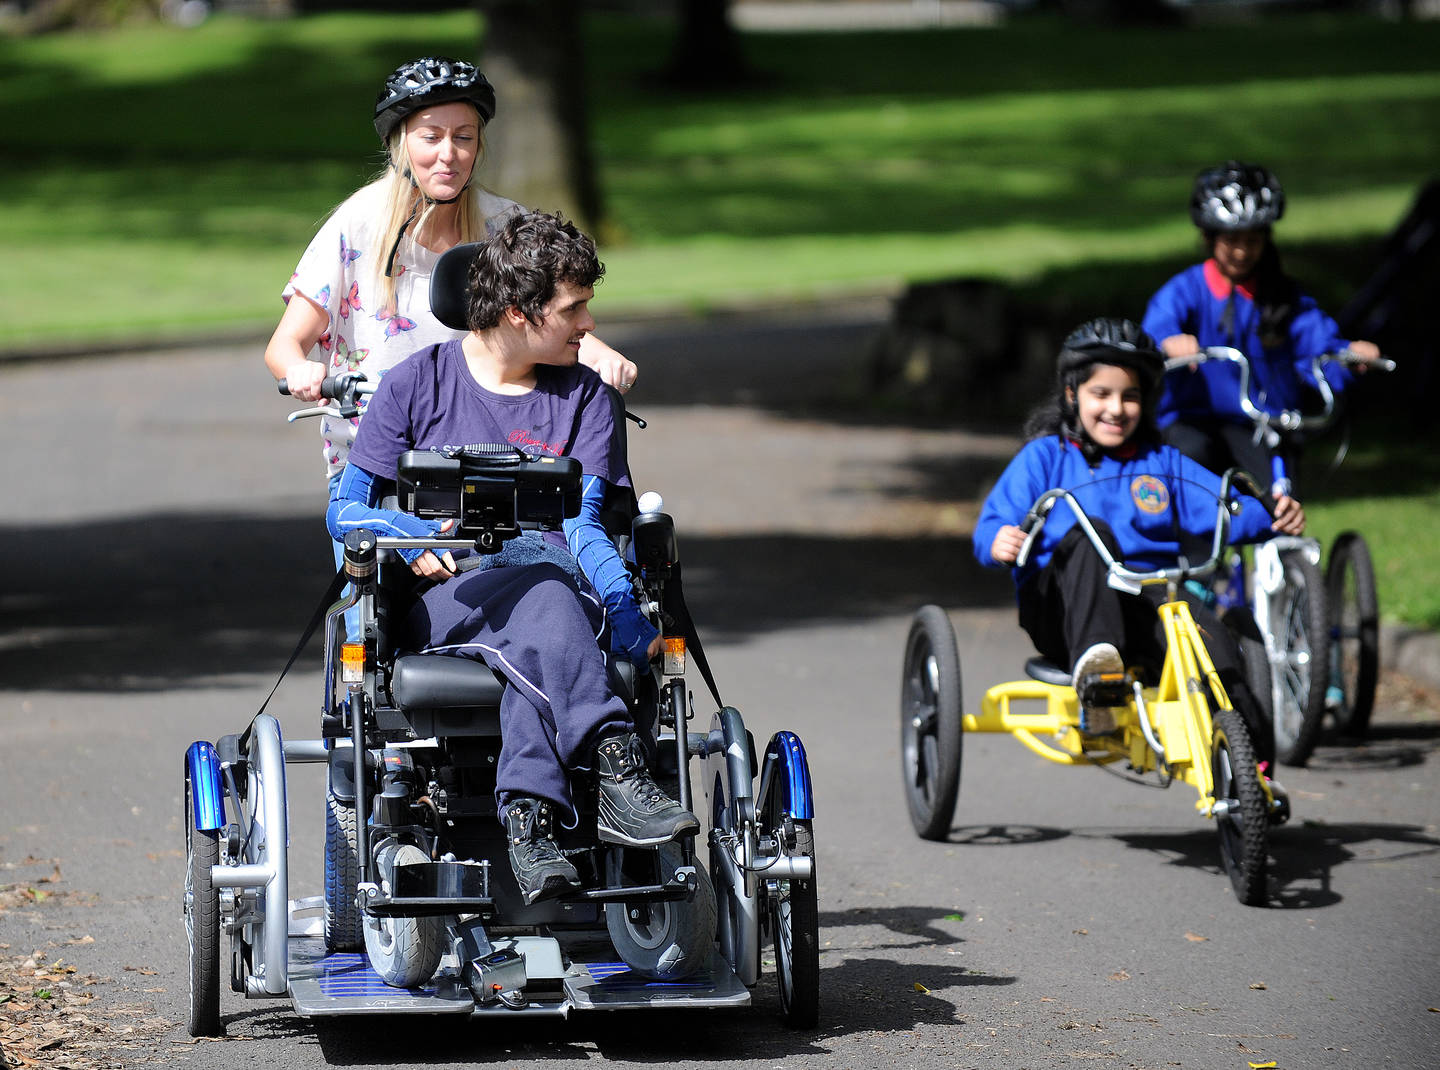 Young man riding adapted bike with supporter during a cycling session in the park  